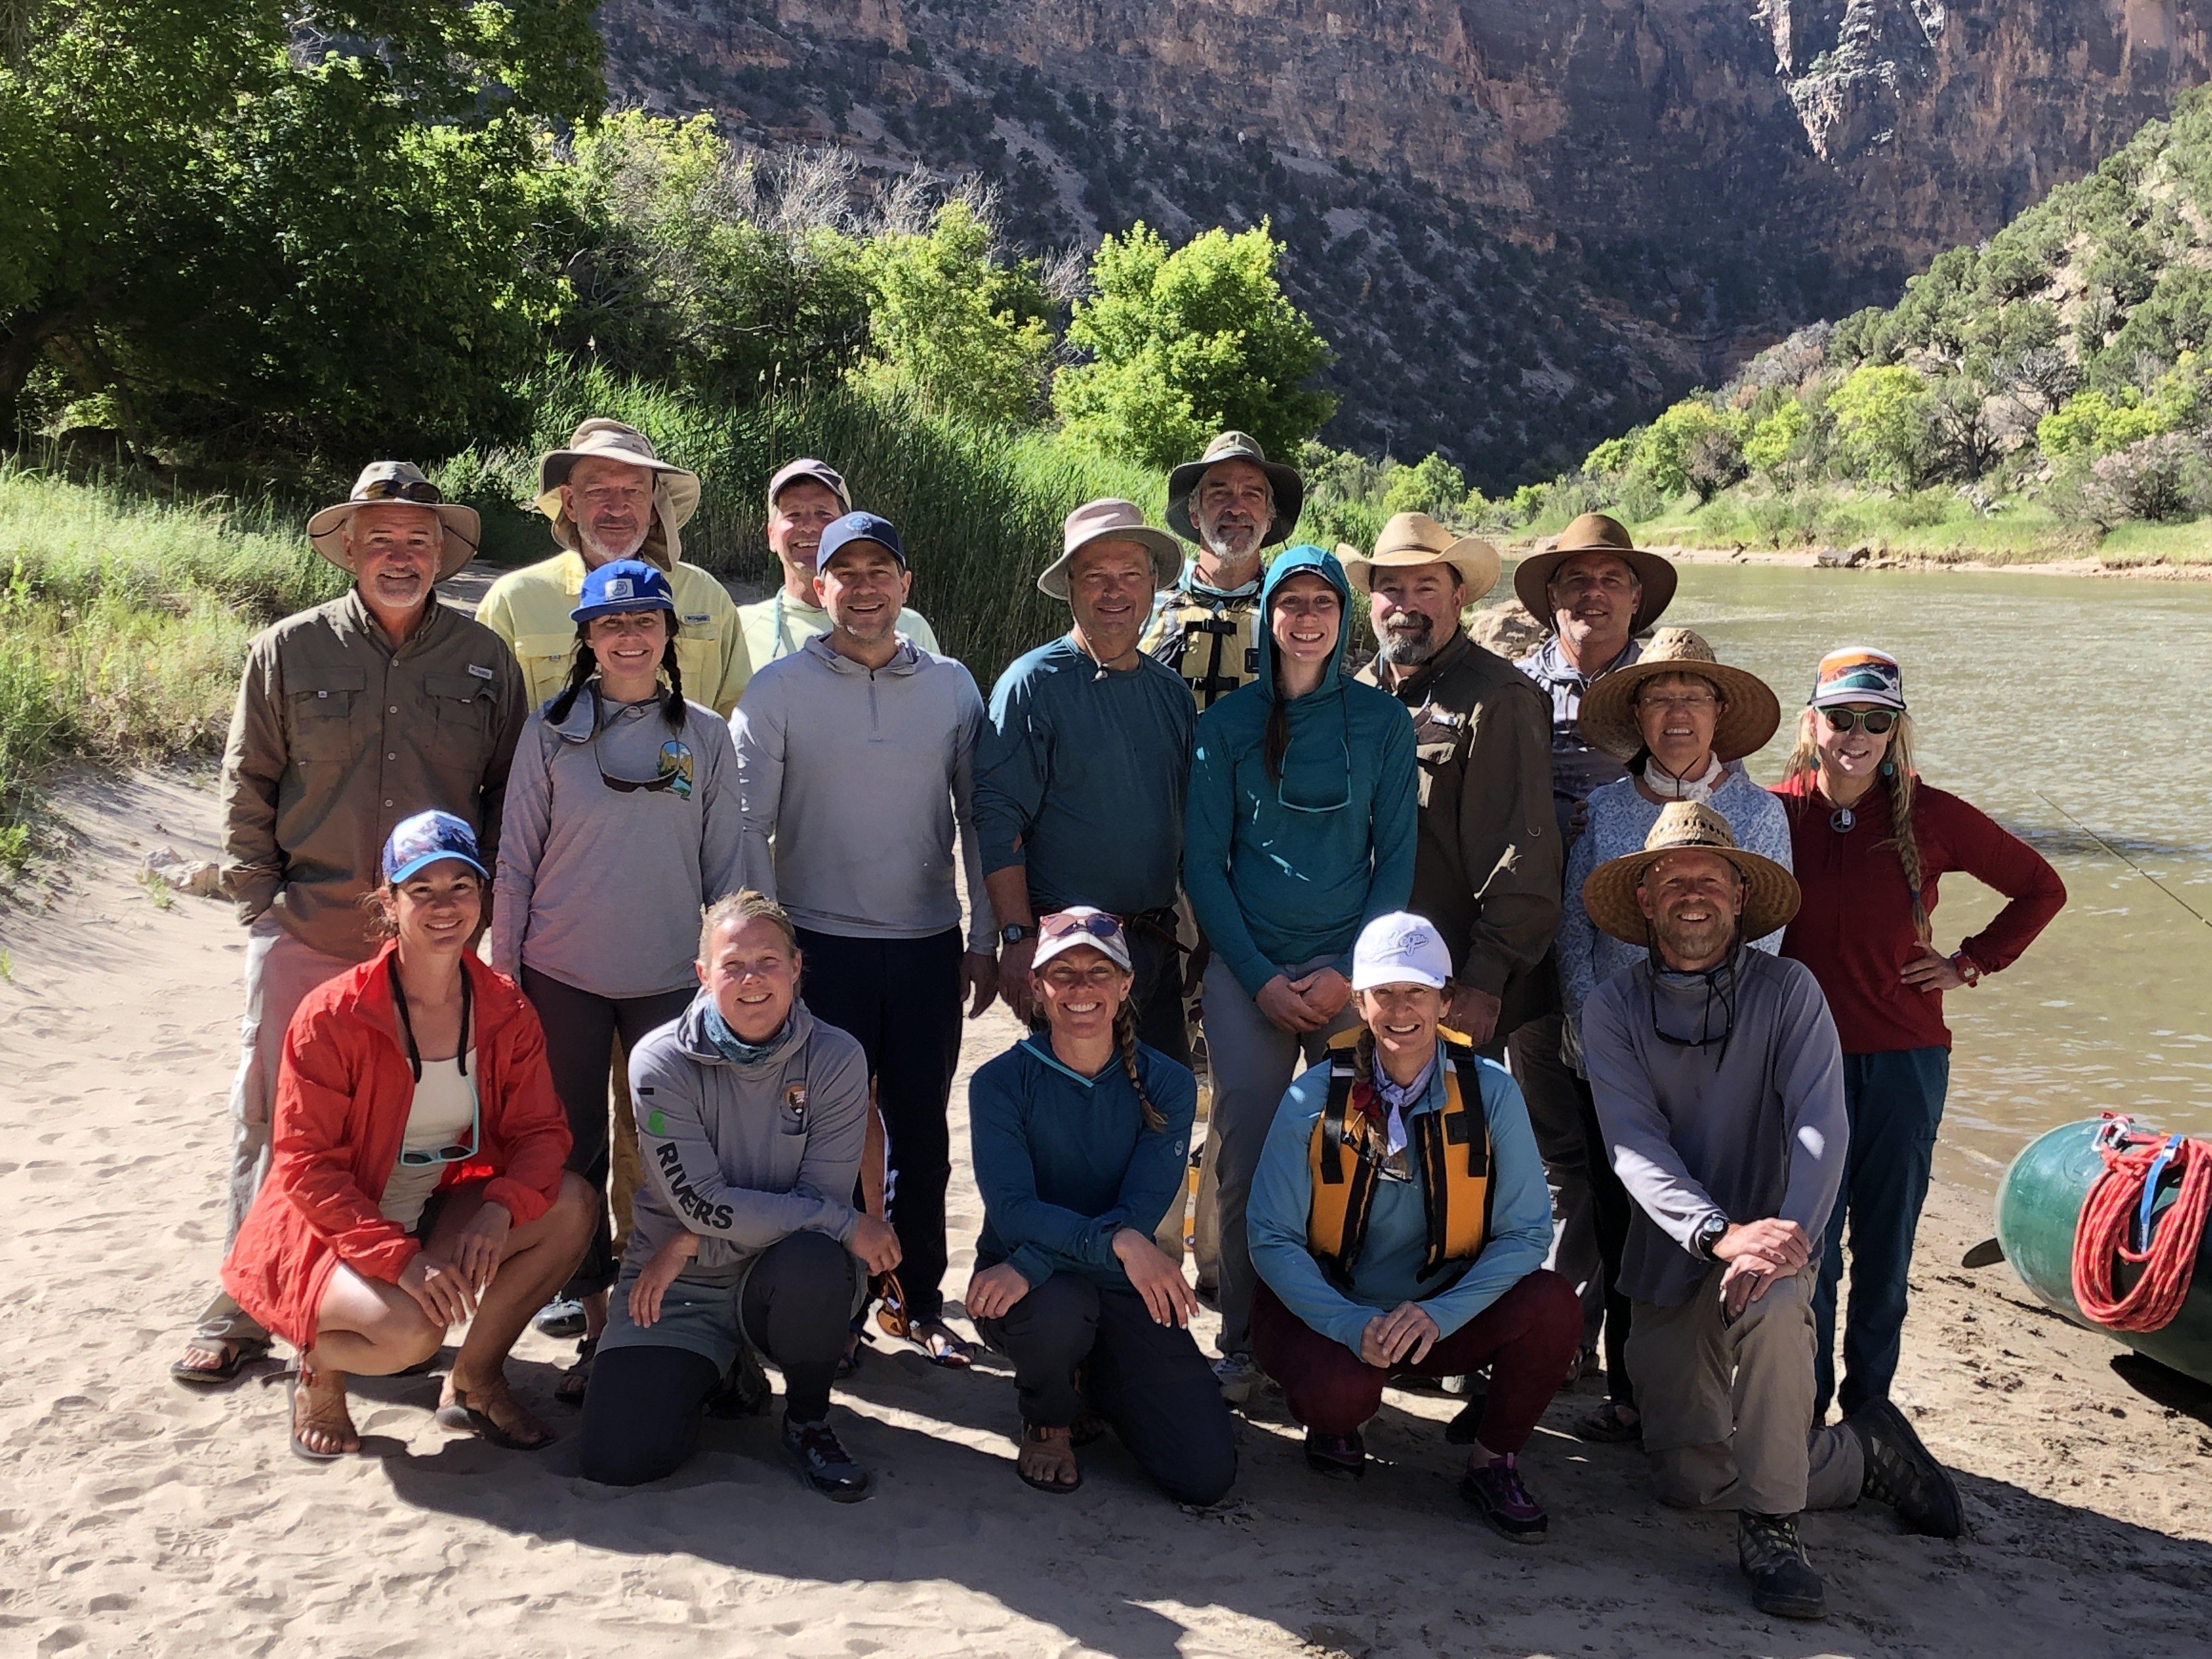 Group picture of men and women along the banks of the Green River in rafting attire..